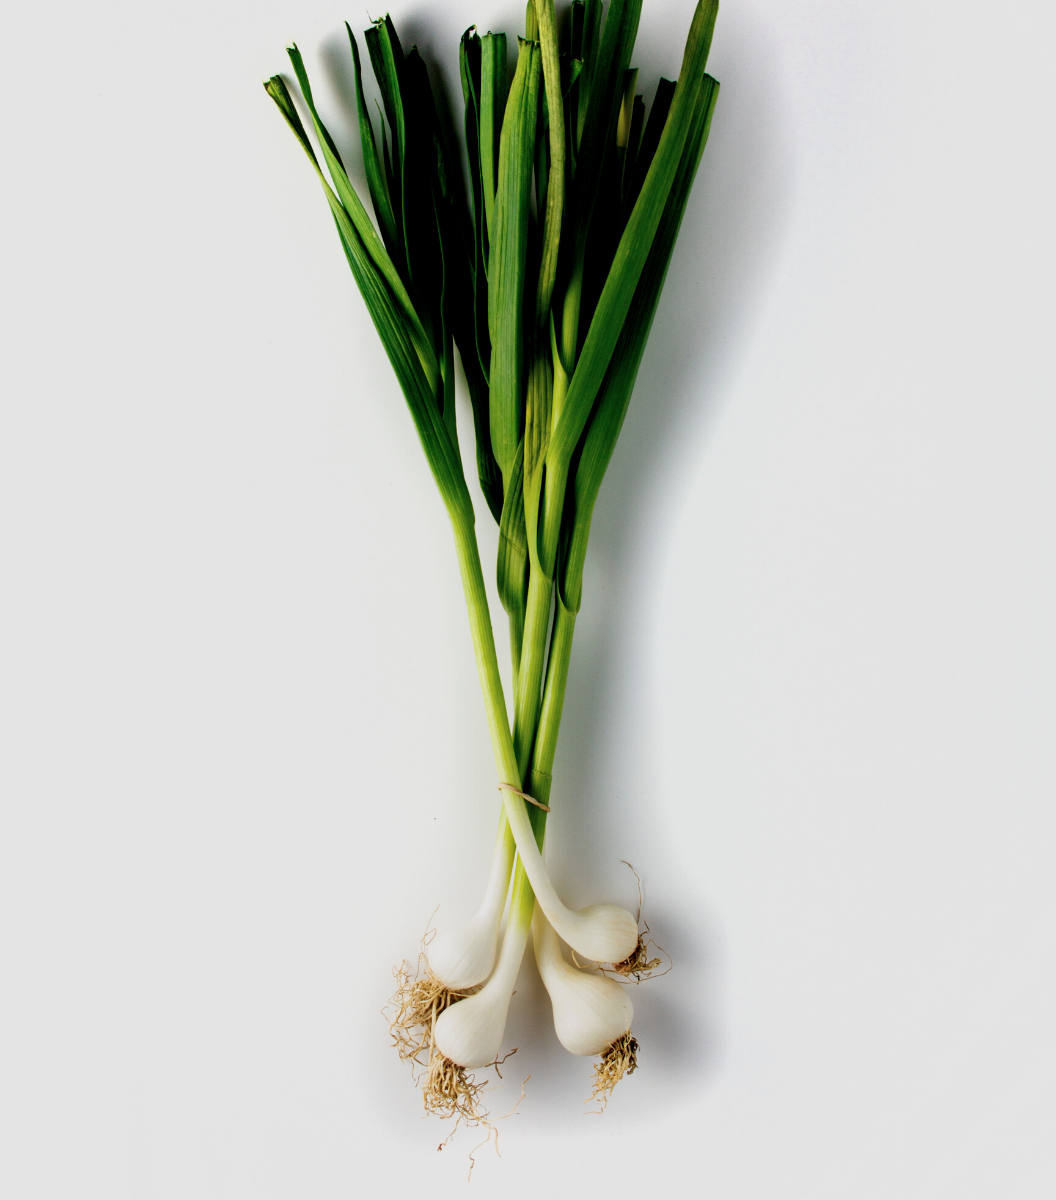 Fresh green Spring Onion / Green Onions 100g | Sasha's Fine Foods Online Grocery Store in Singapore